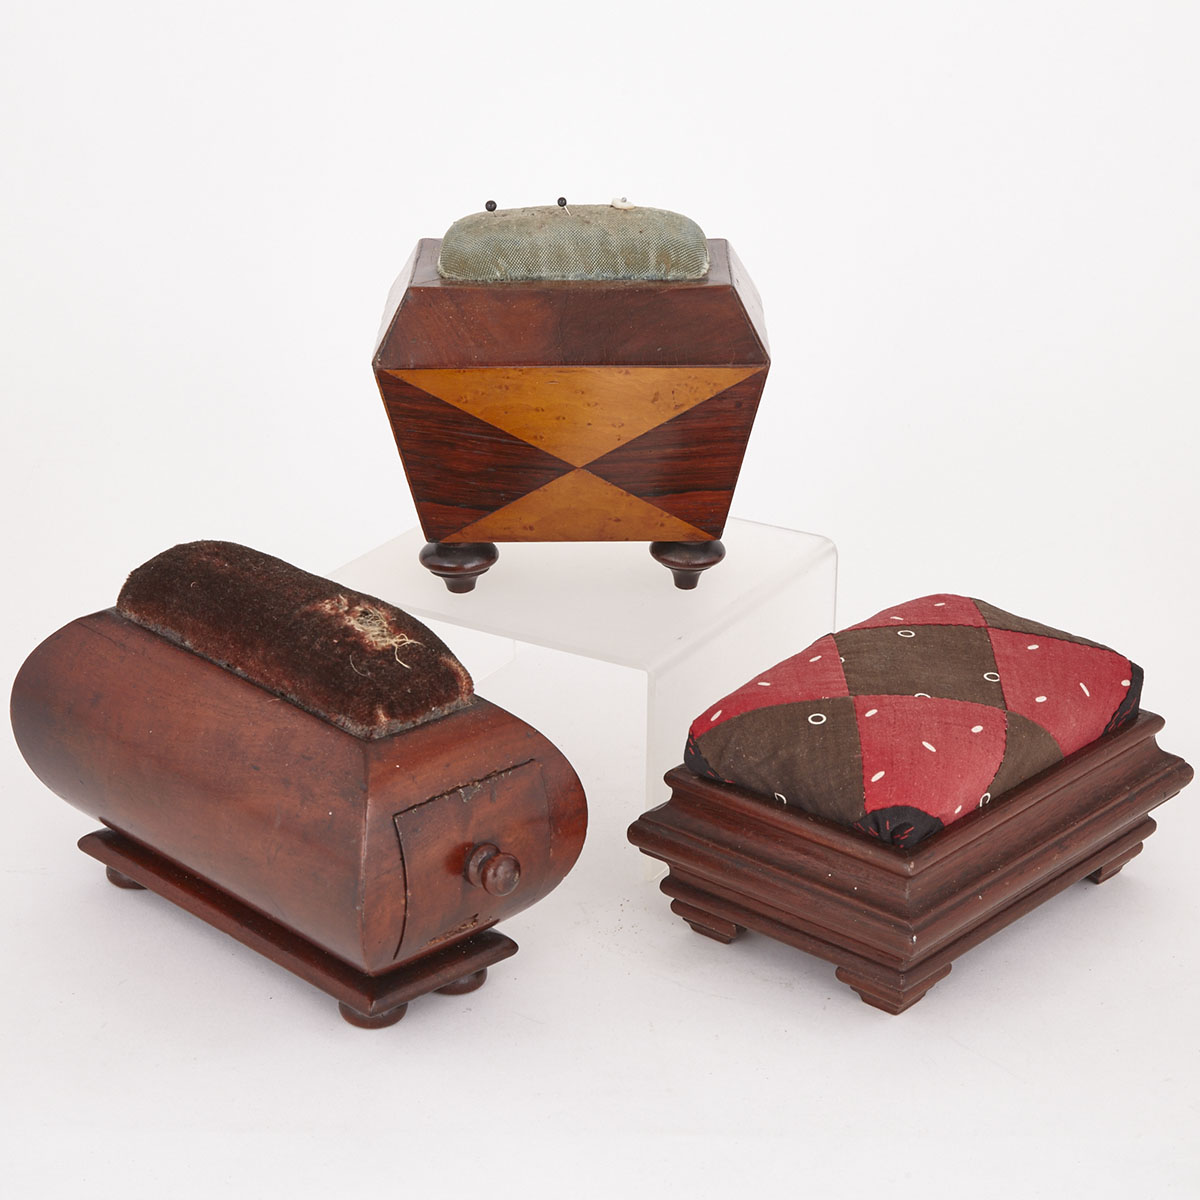 Group of Three Victorian Pin Cushions, mid 19th century